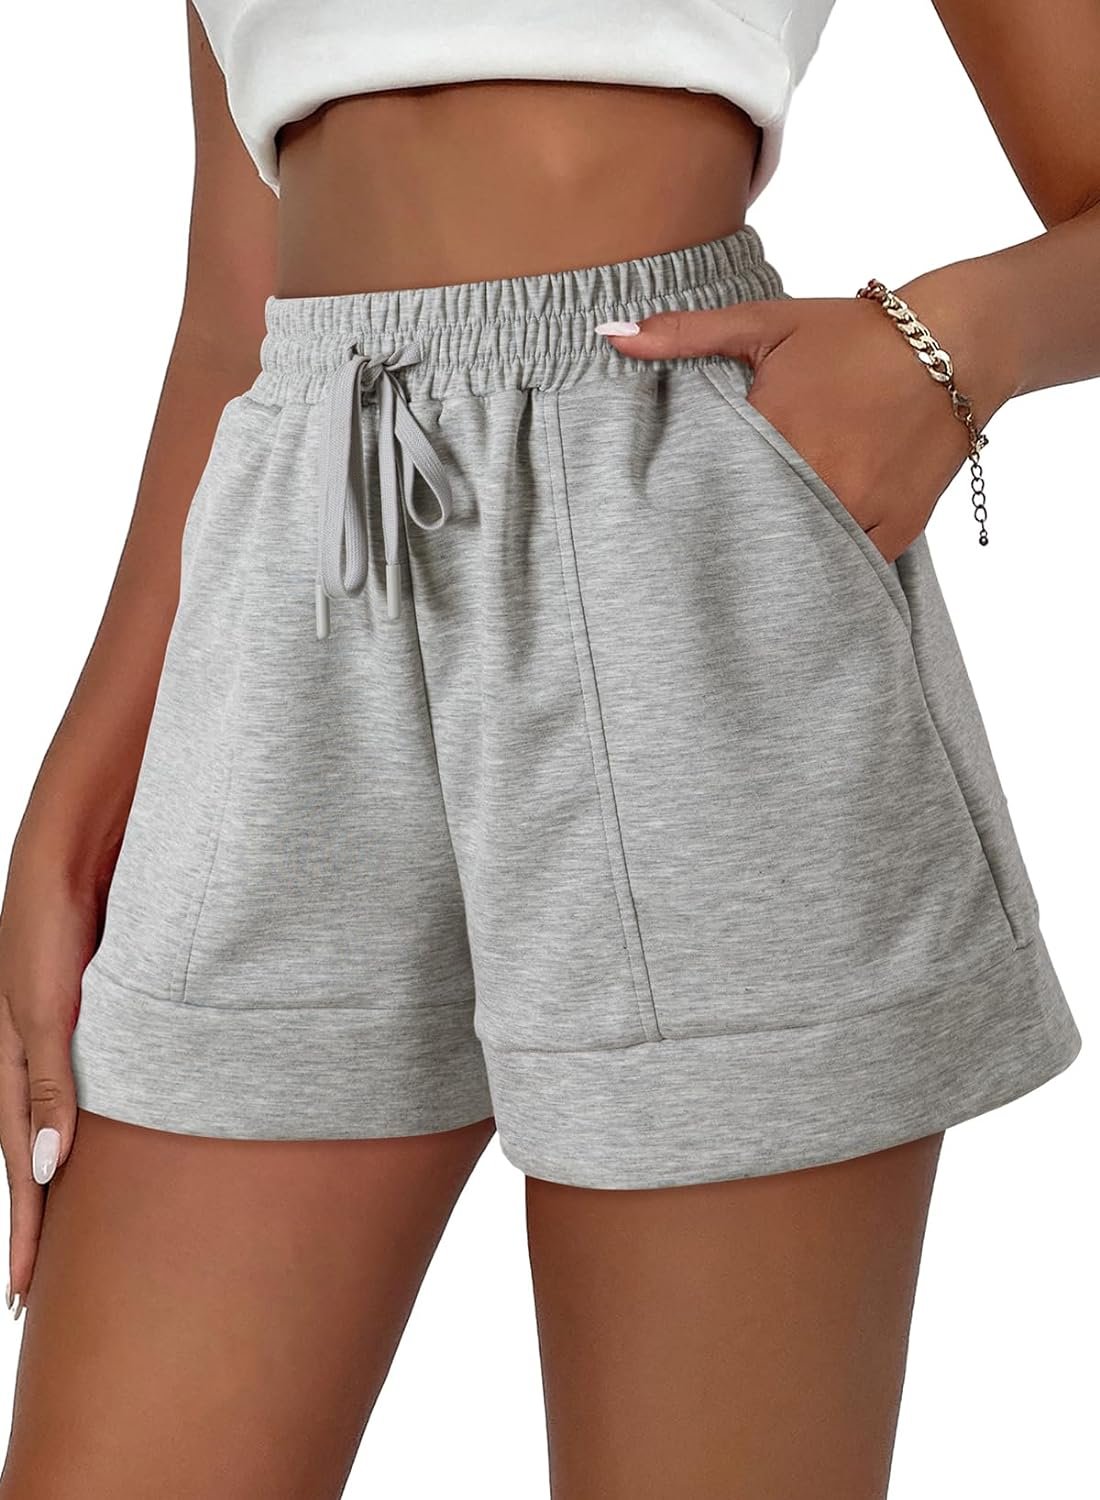 Dokotoo Womens Air Layer Casual Comfy Moisture Wicking Drawstring Shorts with Pockets